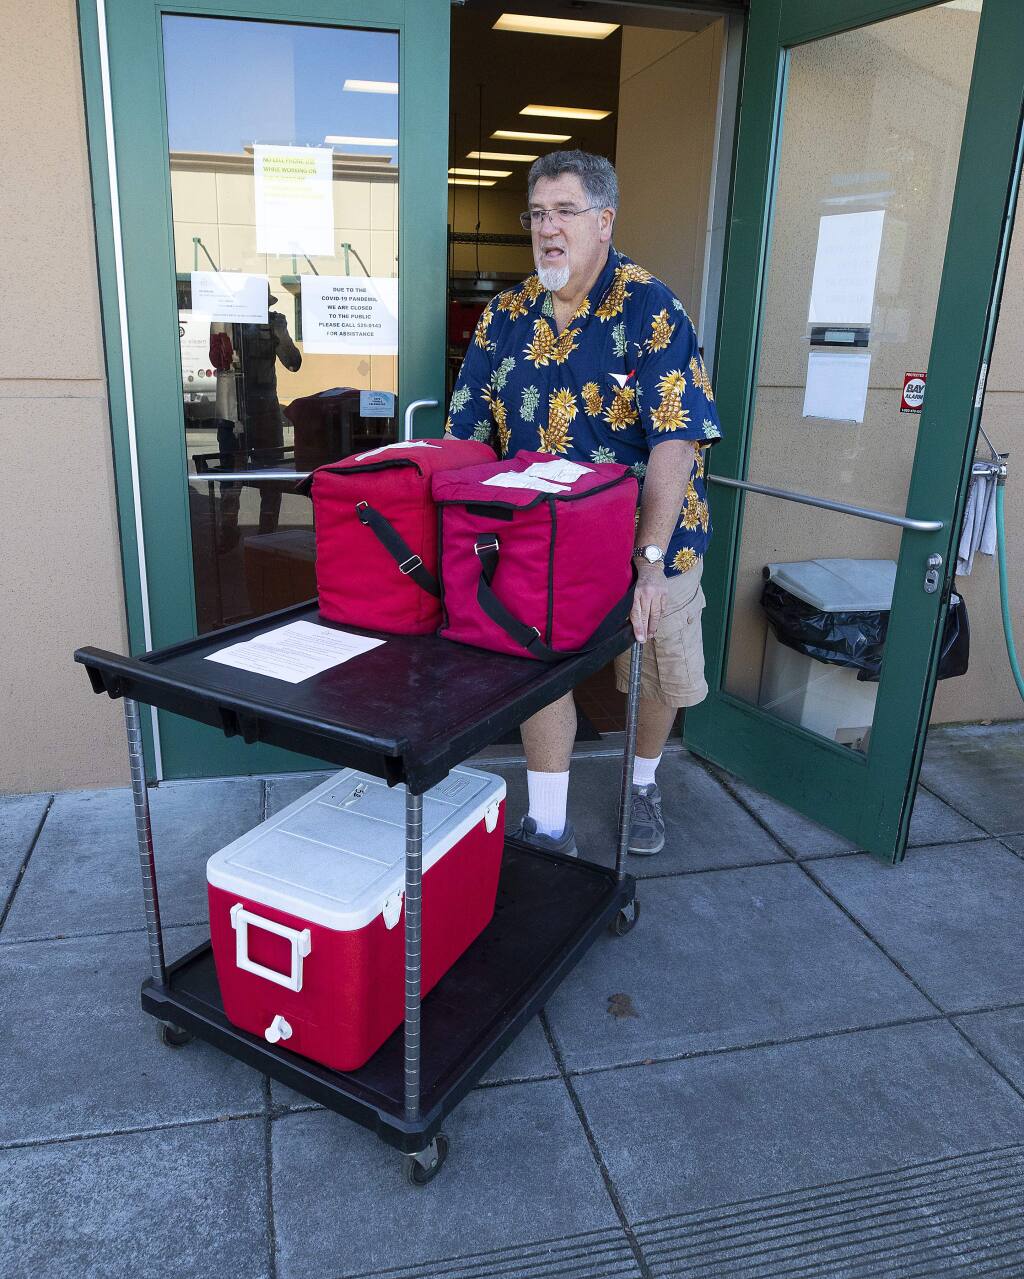 Meals on Wheels driver Jim McLaughlin loads his car with food for delivery to seniors at the Council on Aging kitchen in Santa Rosa on Wednesday, April 1, 2020. (John Burgess/The Press Democrat)